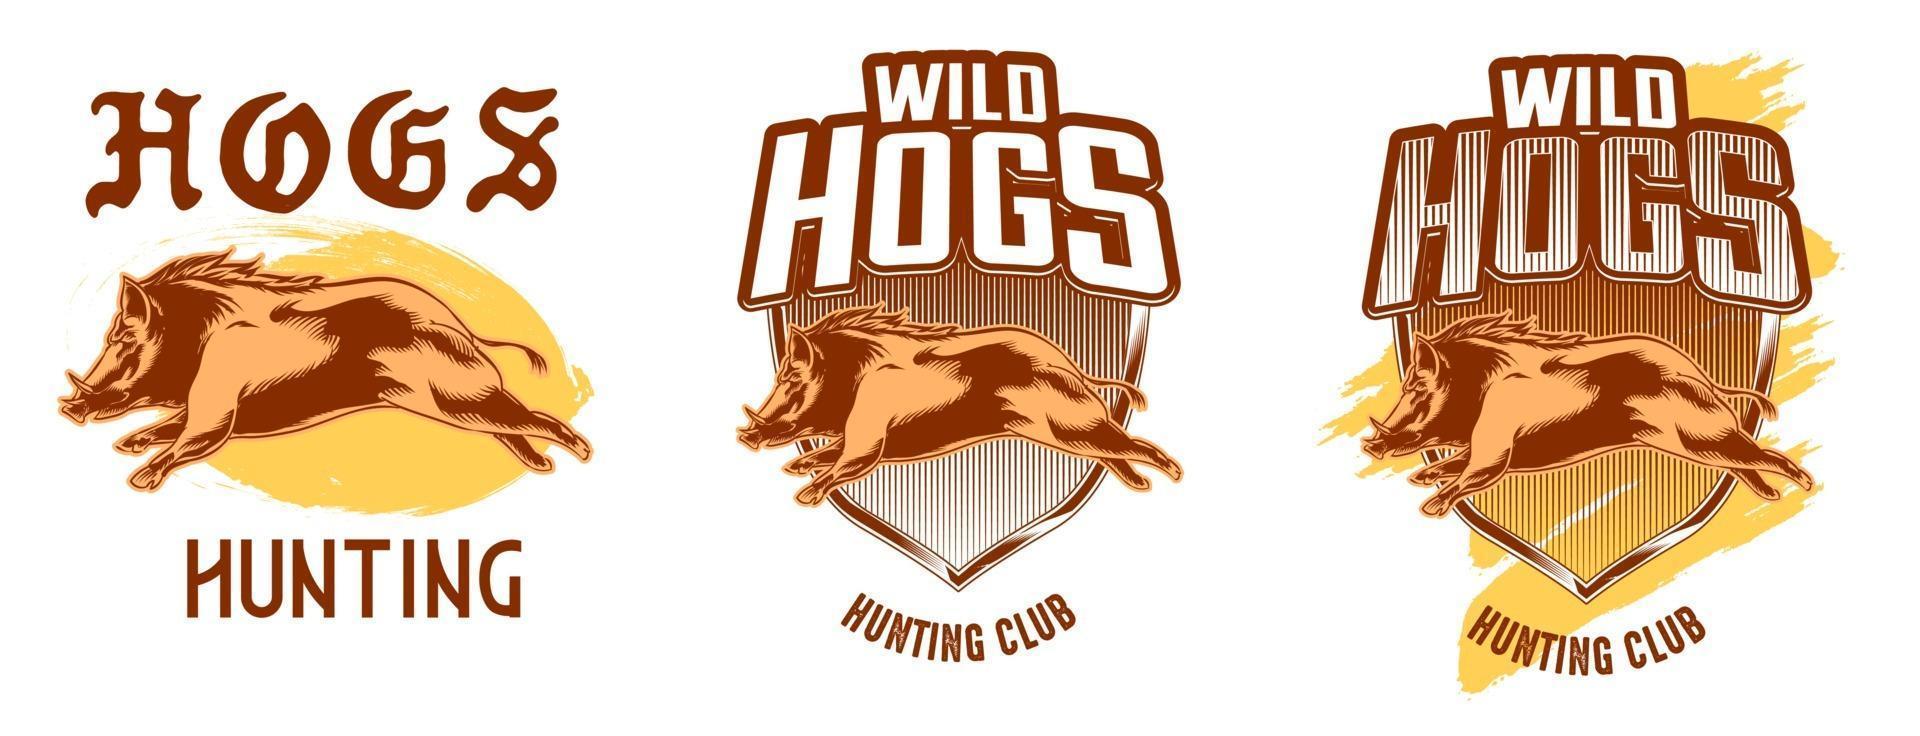 Hogs hunting logo shirt design for clothing gear vector